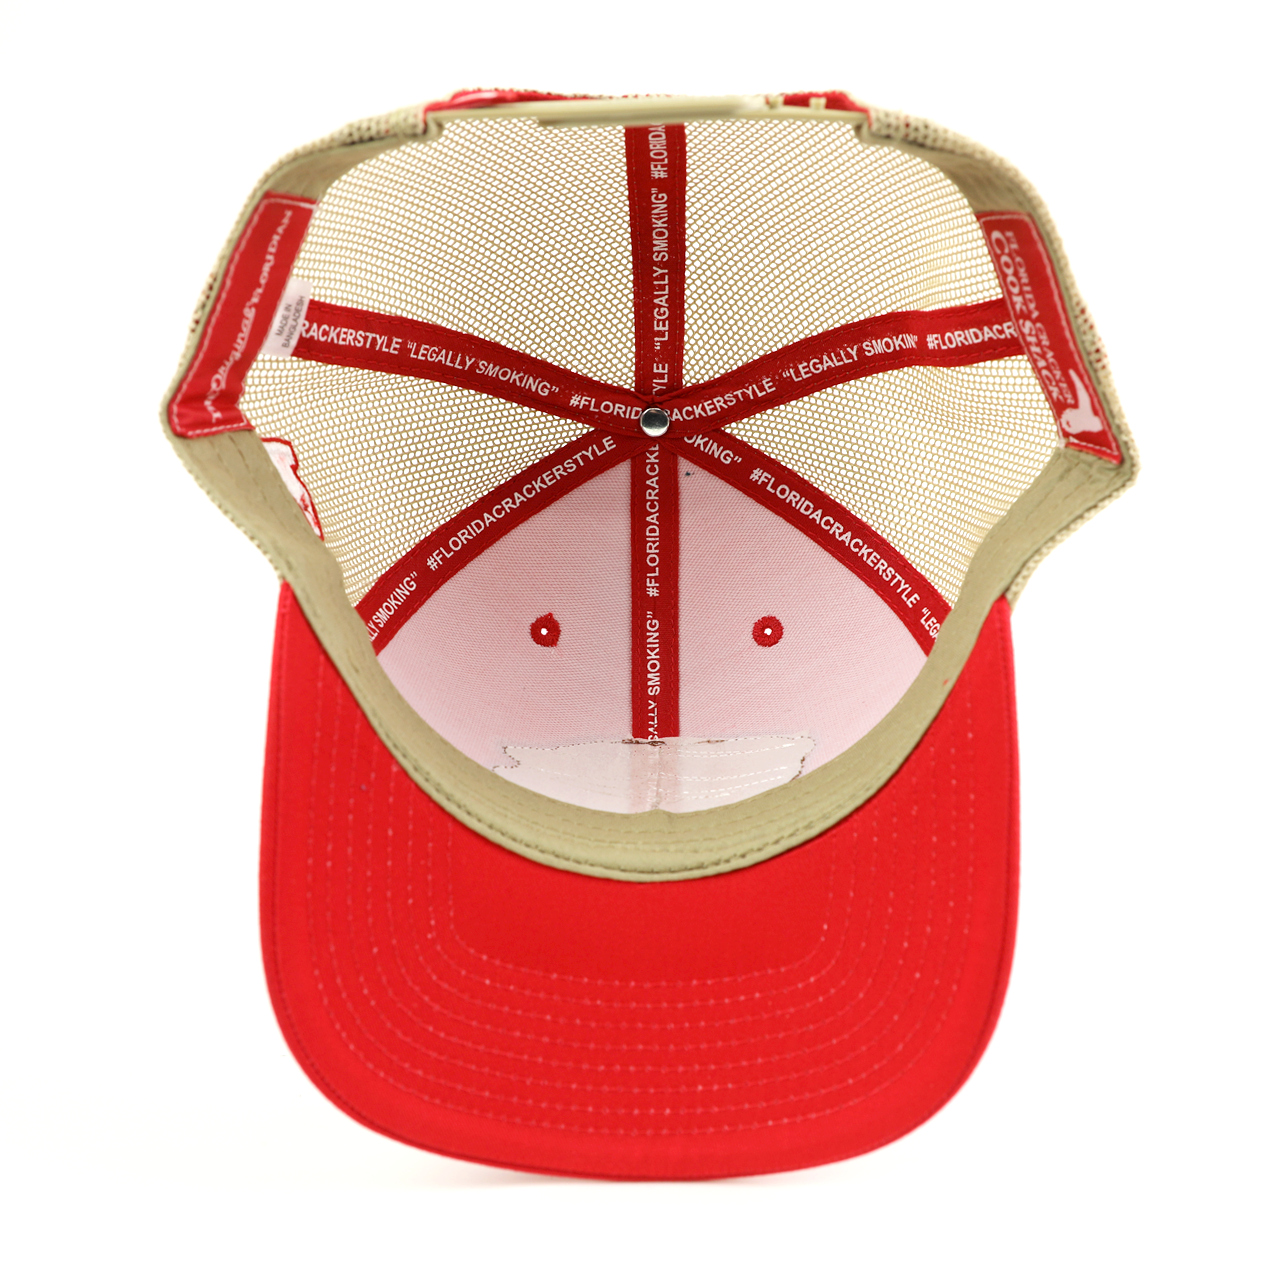 COOK SHACK HAT - STATE FLAG PIG RED/TAN